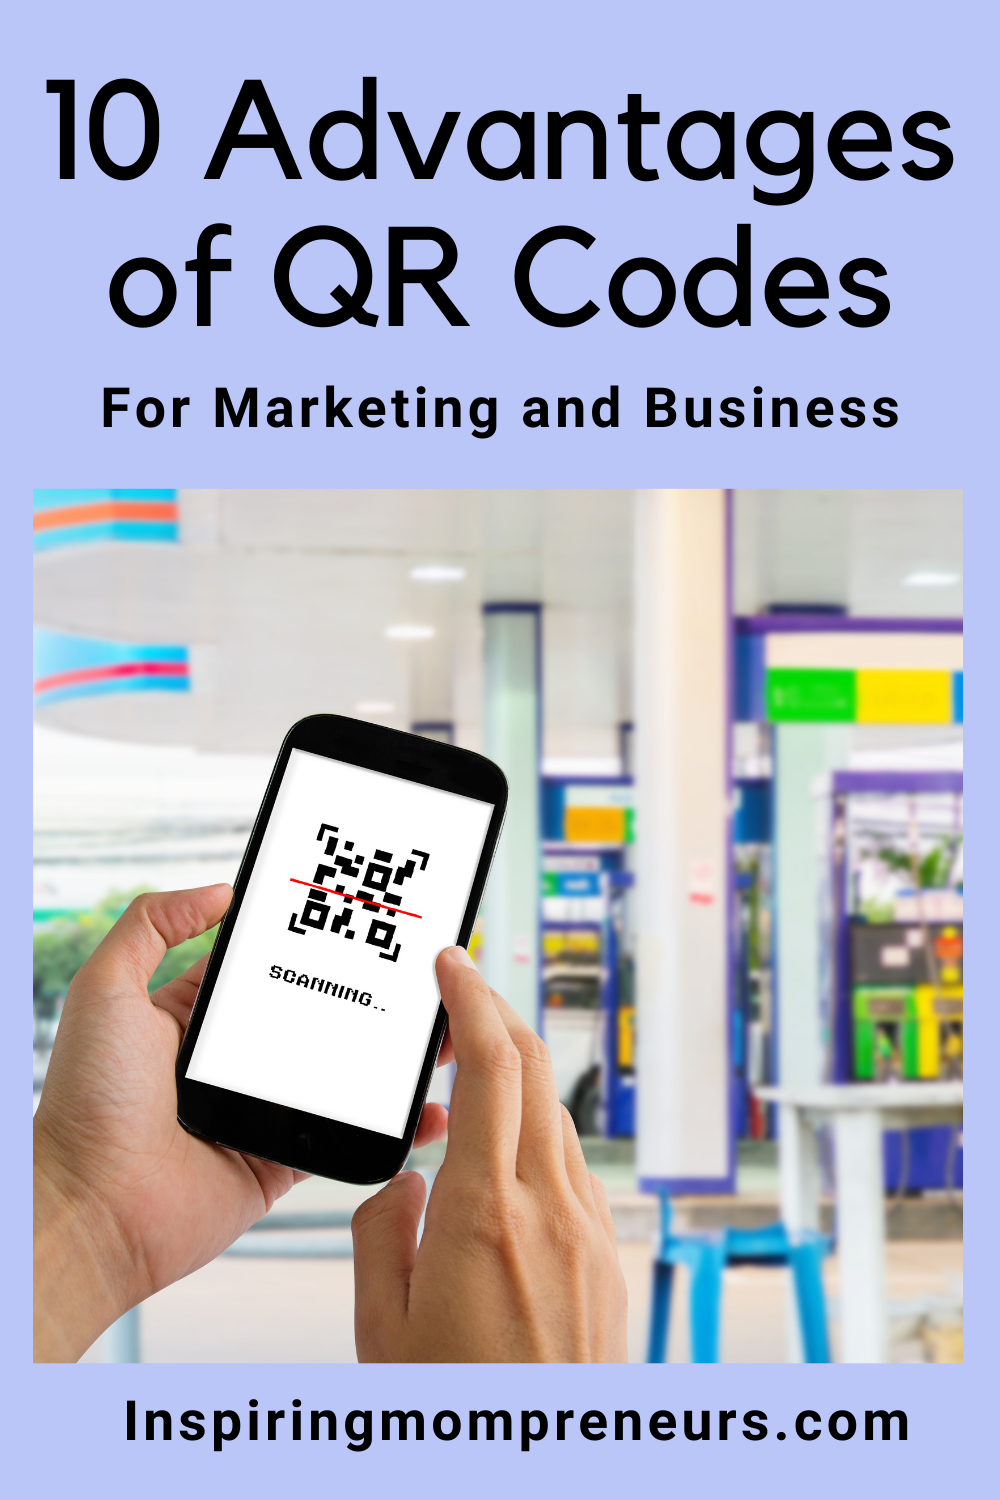 The advantages of QR codes for marketing and business are endless.  Here is a list of 10 important benefits so you can look forward to when investing in a QR code generator platform for your business. #qrcodes #businessbenefits #marketingstrategies